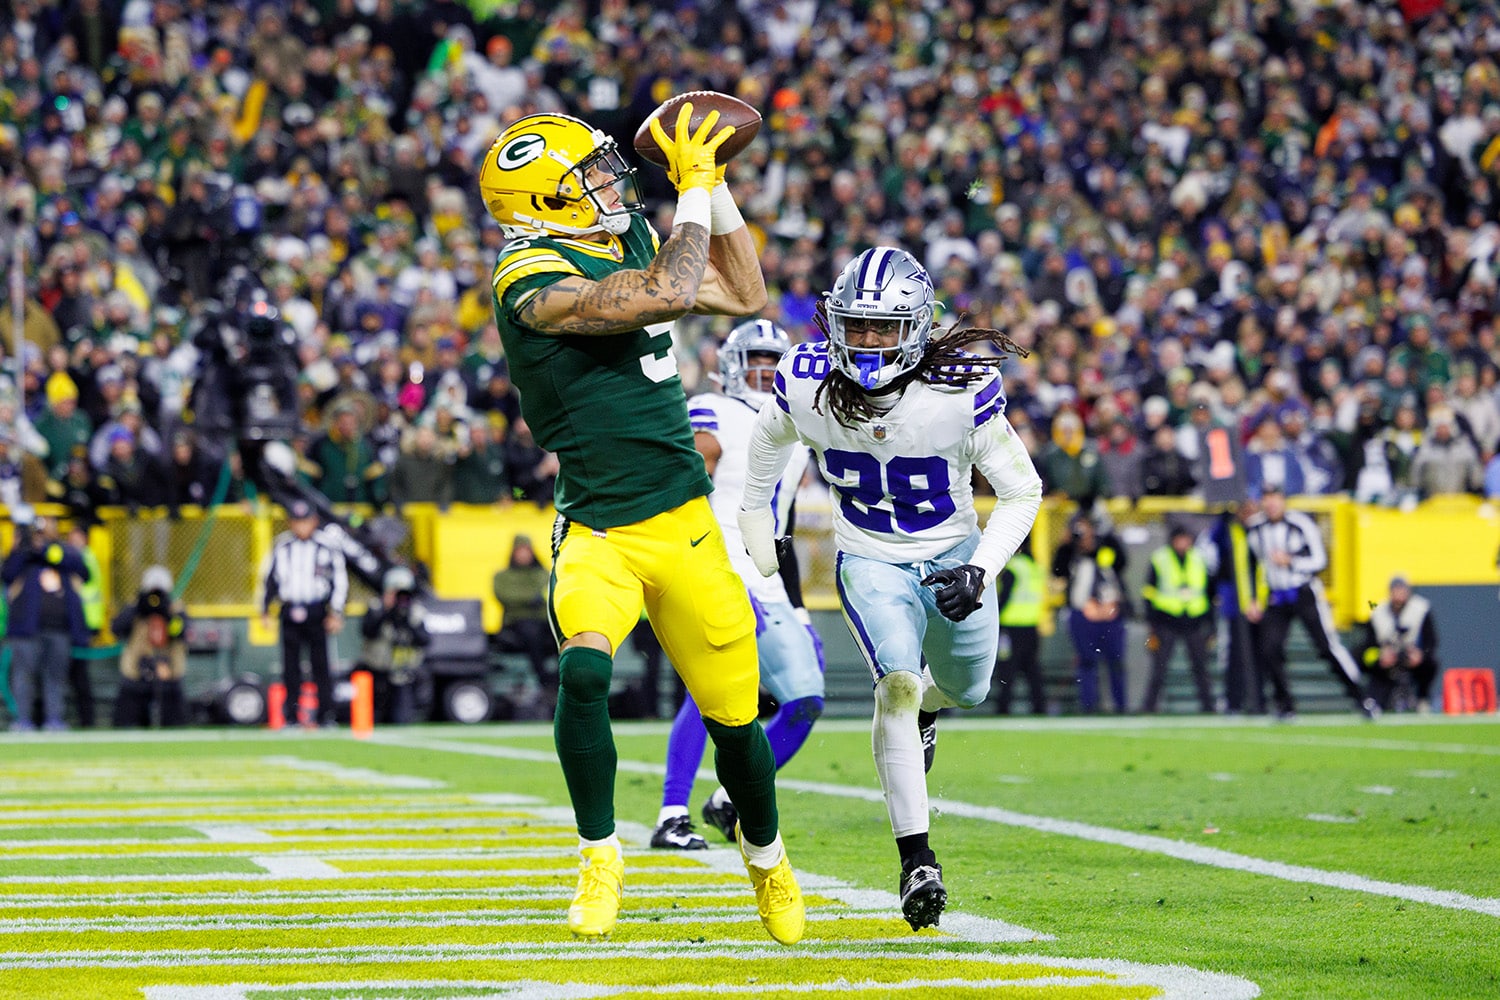 Packers rookie receiver Christian Watson catches touchdown against Dallas Cowboys during NFL game at Lambeau Field